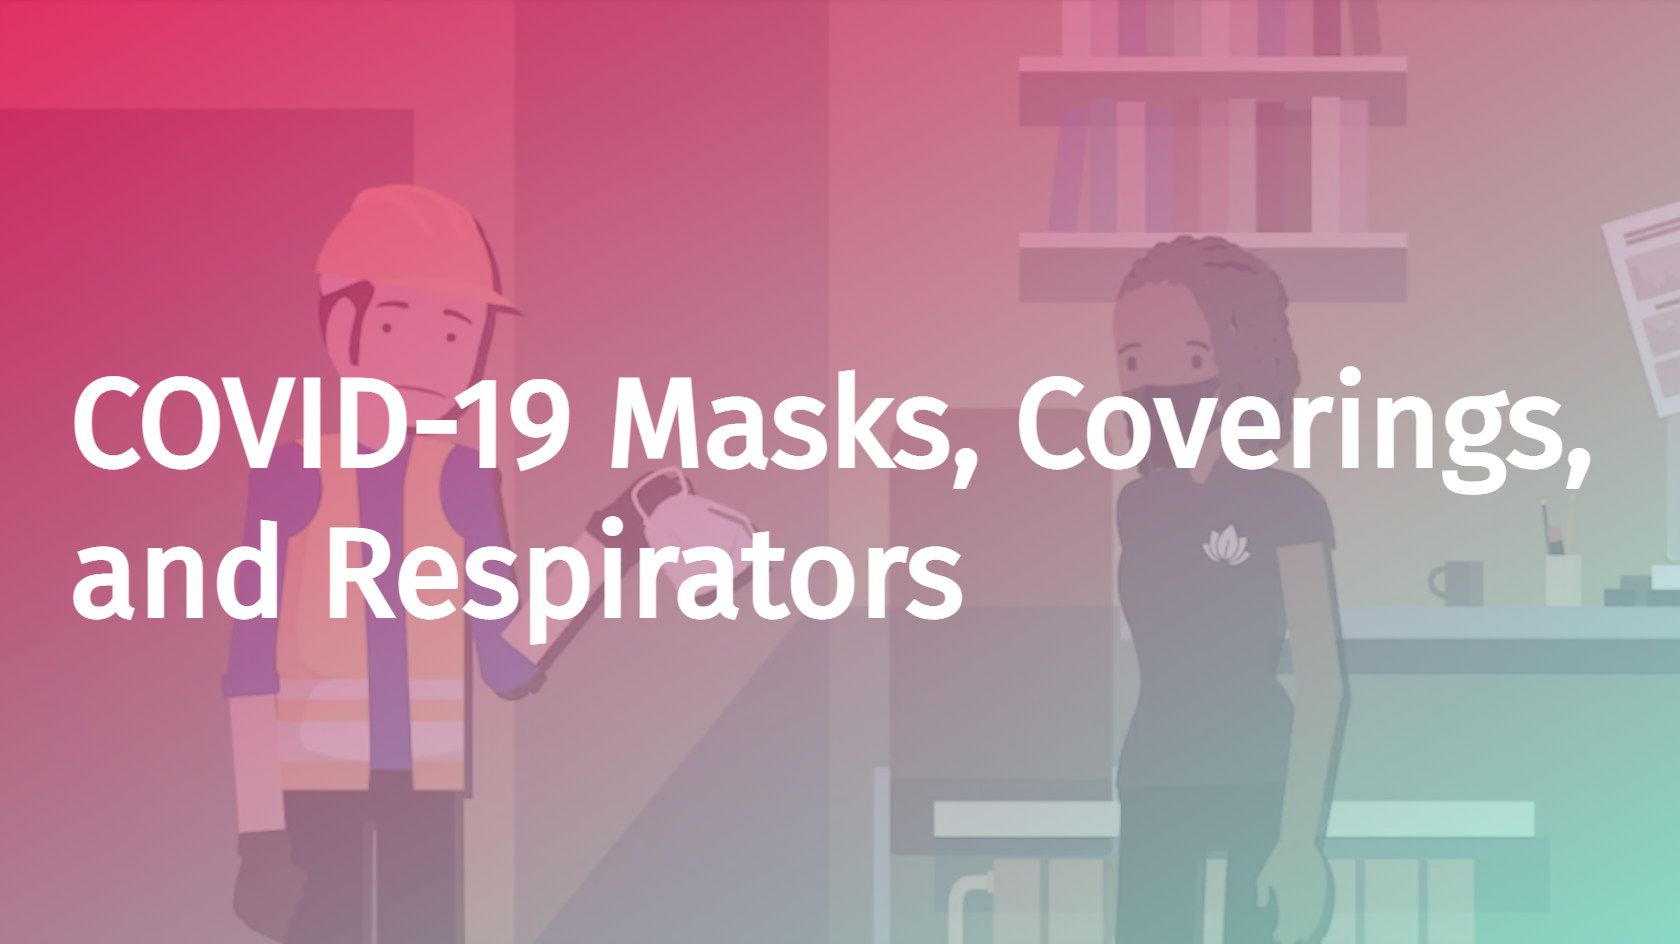 COVID-19 Masks, Coverings, and Respirators